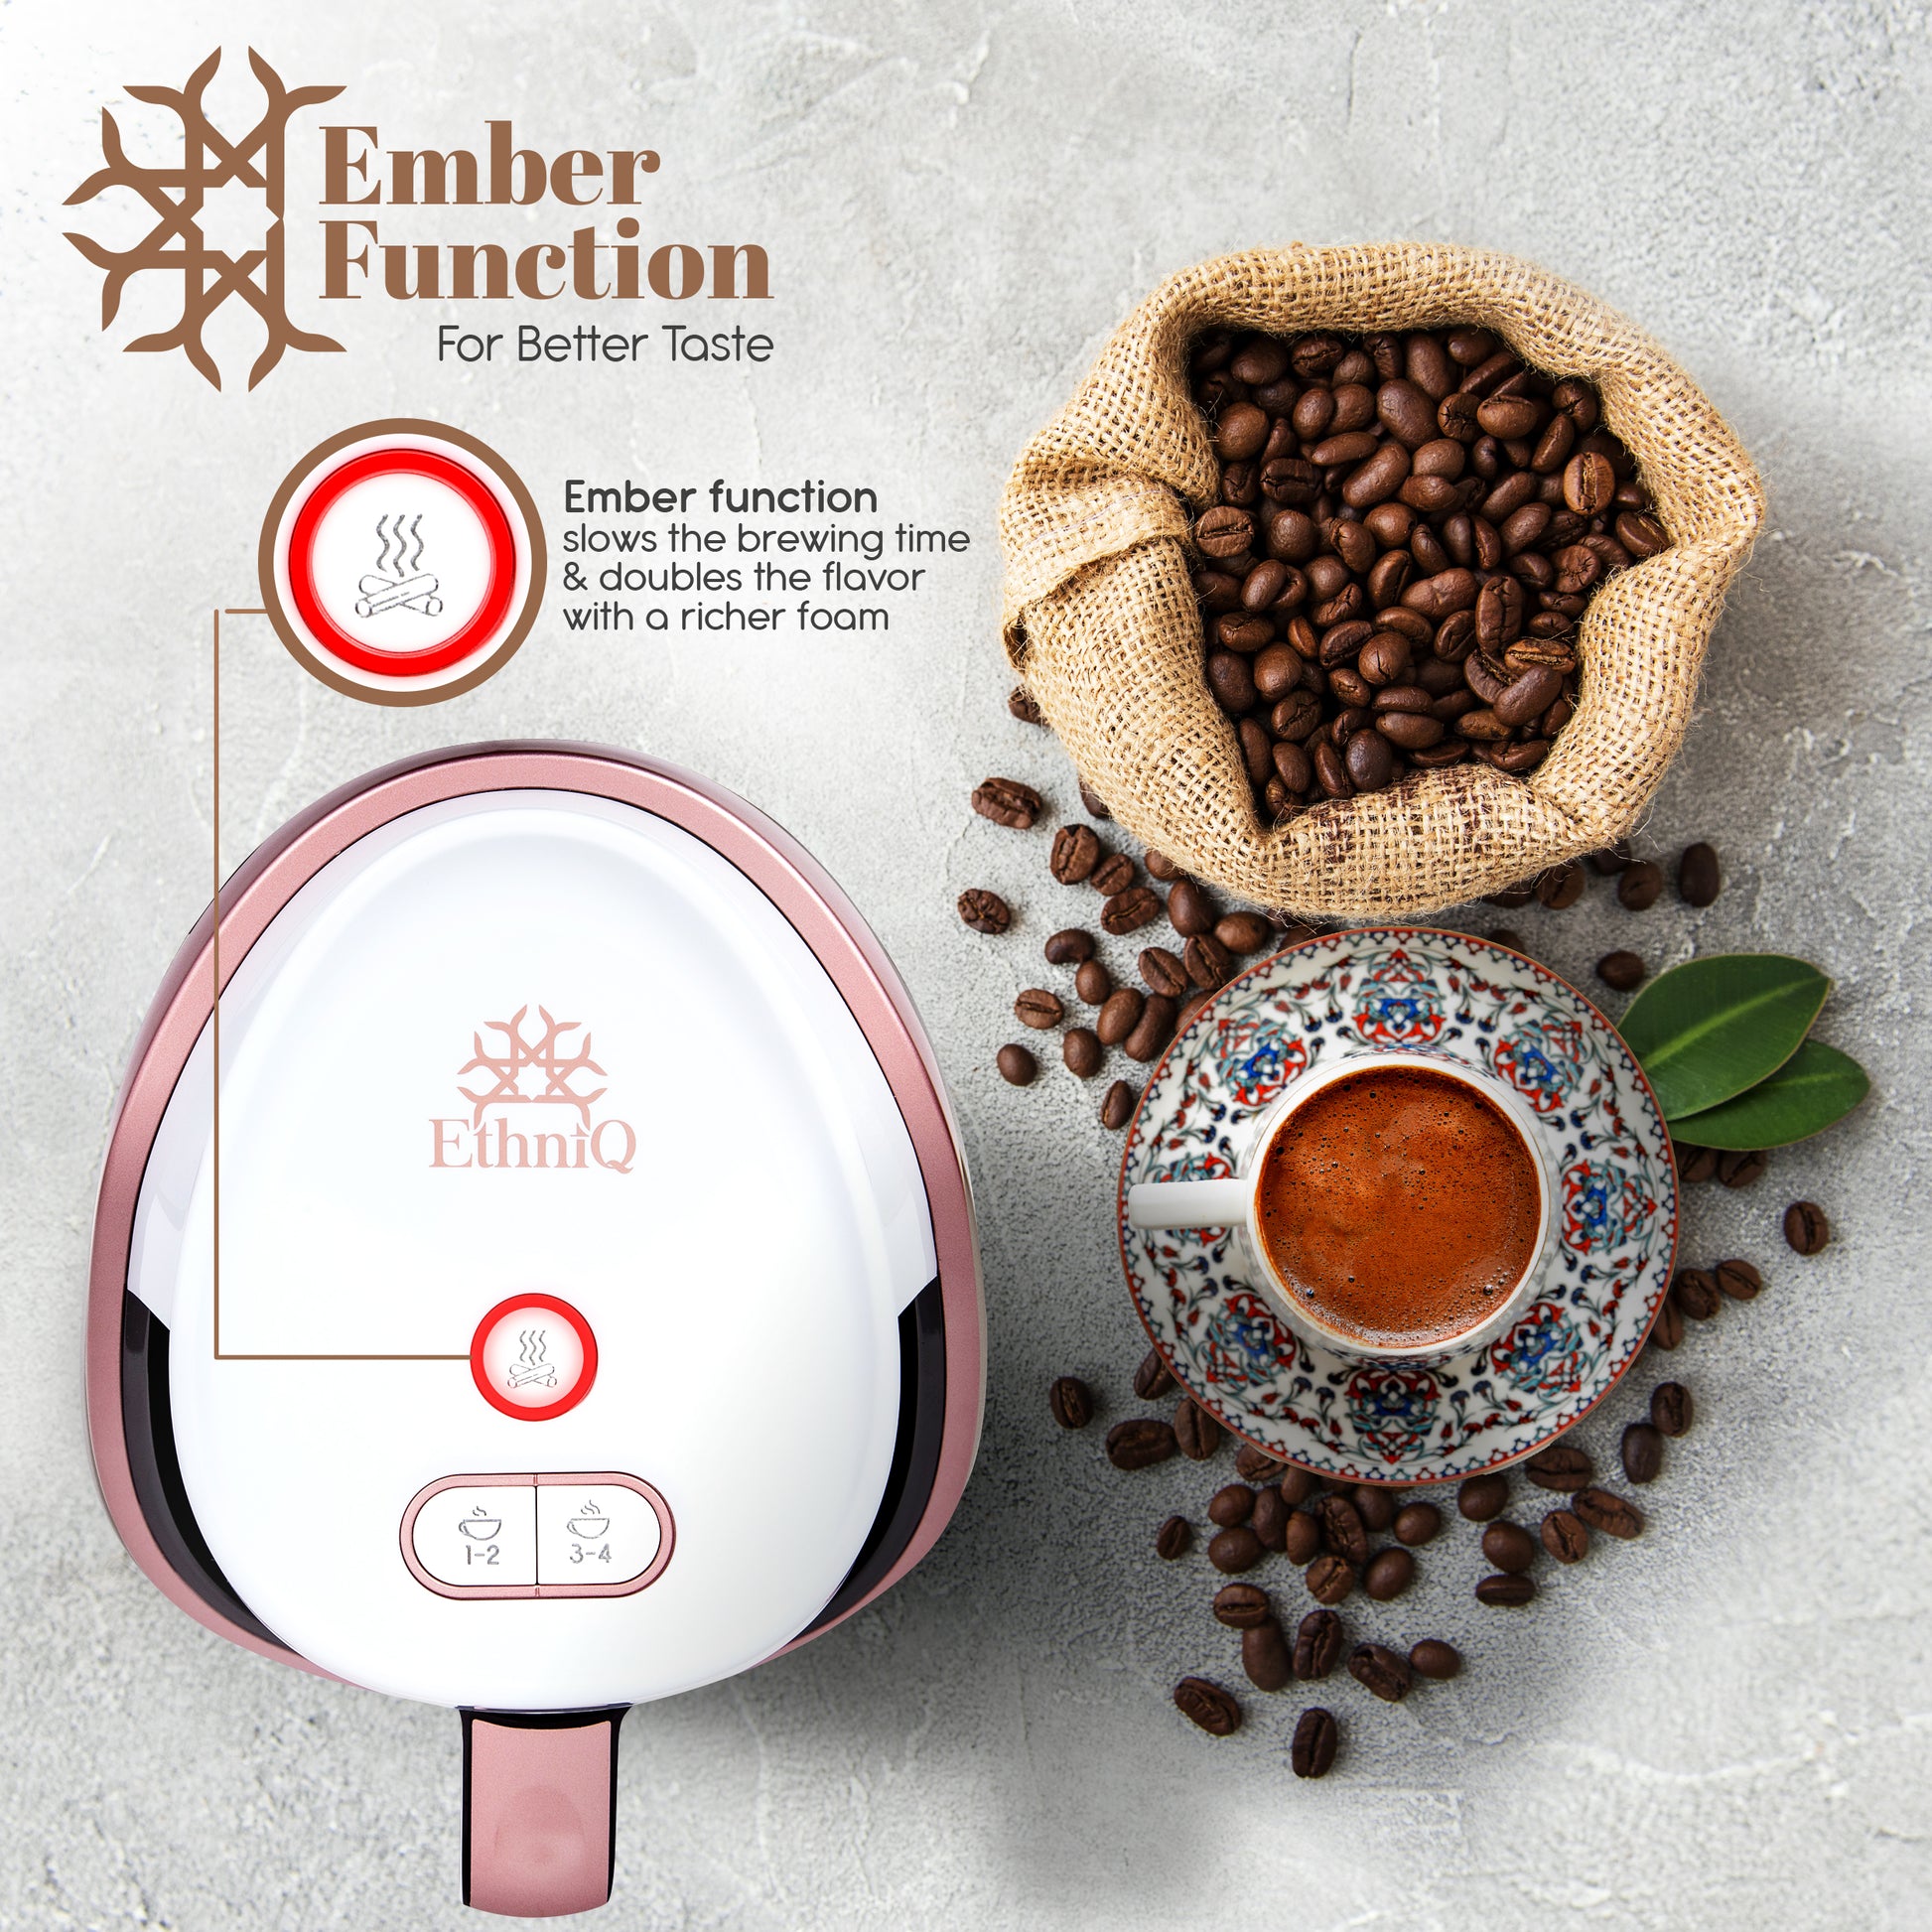 Turkish Coffee Maker - 100% BPA Free, 120V, 1 to 4 Cup Brewing